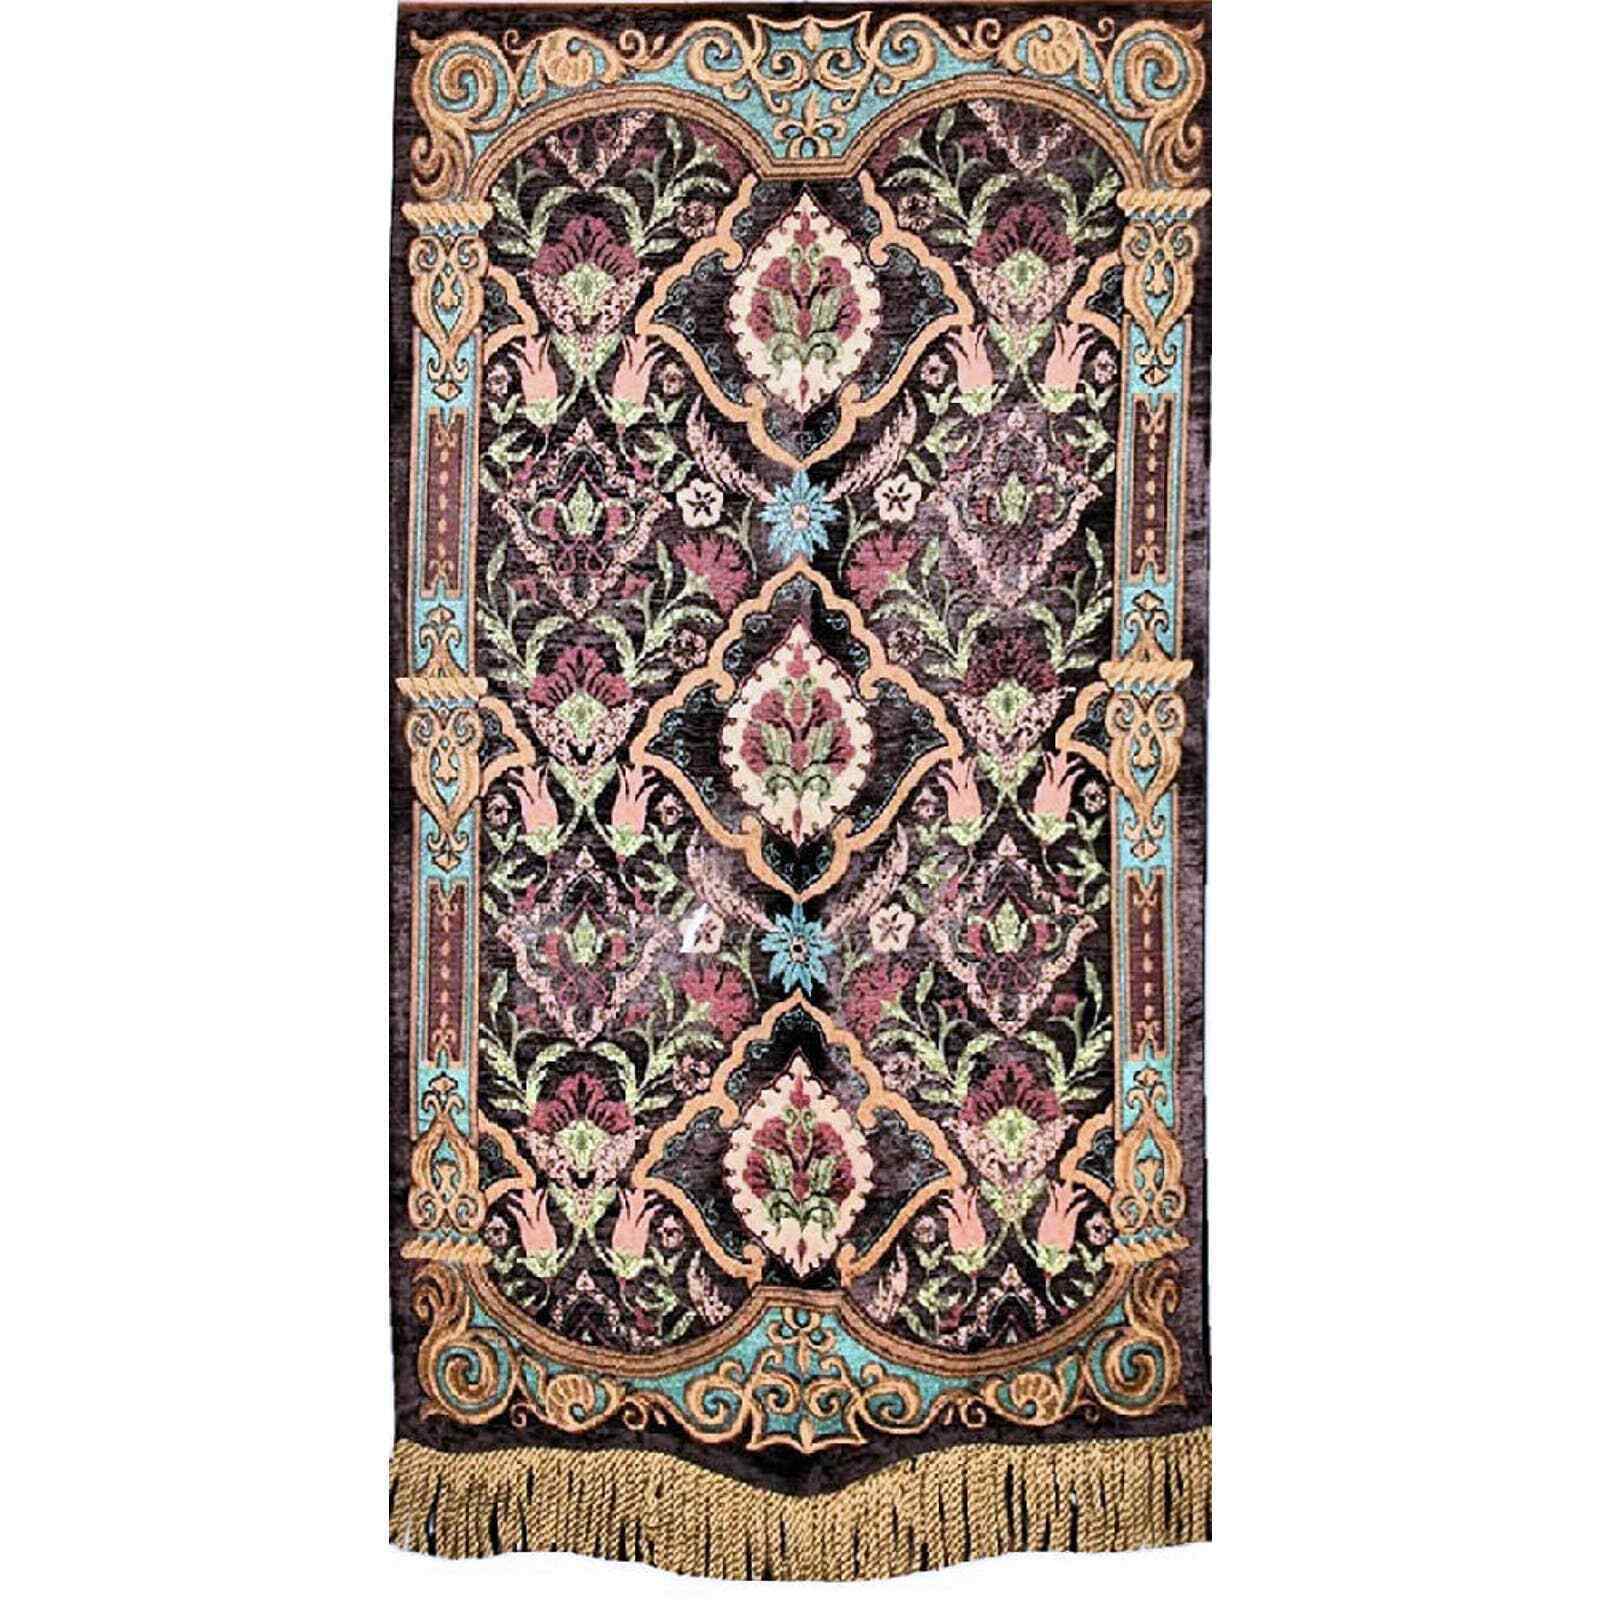 Grande Vivian Fringed Brown Art Deco Woven Tapestry Wall Hanging 26x47" NEW